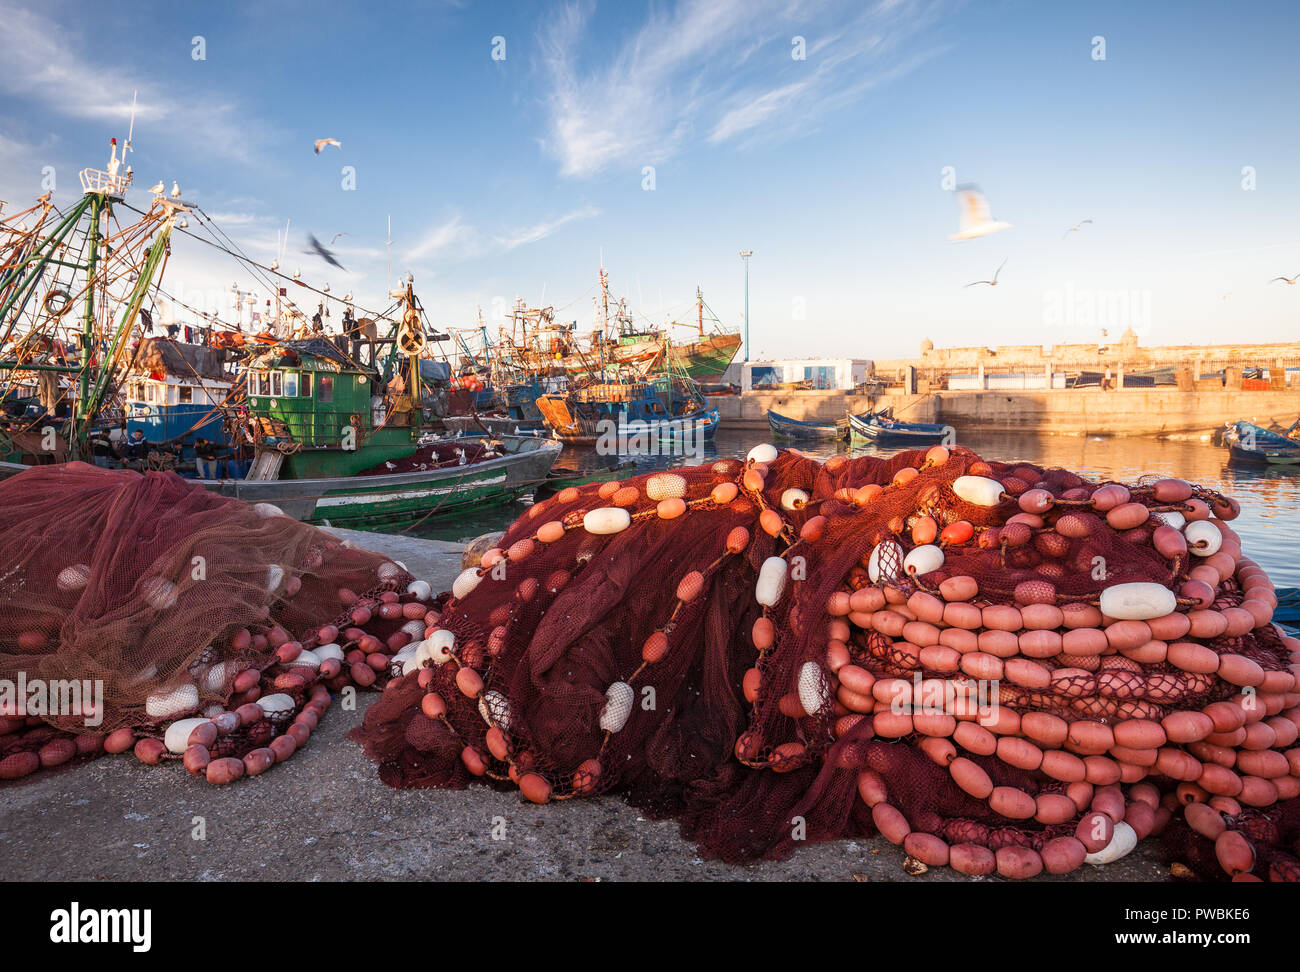 Morocco Essaouira harbor scene in daylight. Mounds of red fish netting and floats in the foreground, colorful painted fishing boats in the backtround. Stock Photo